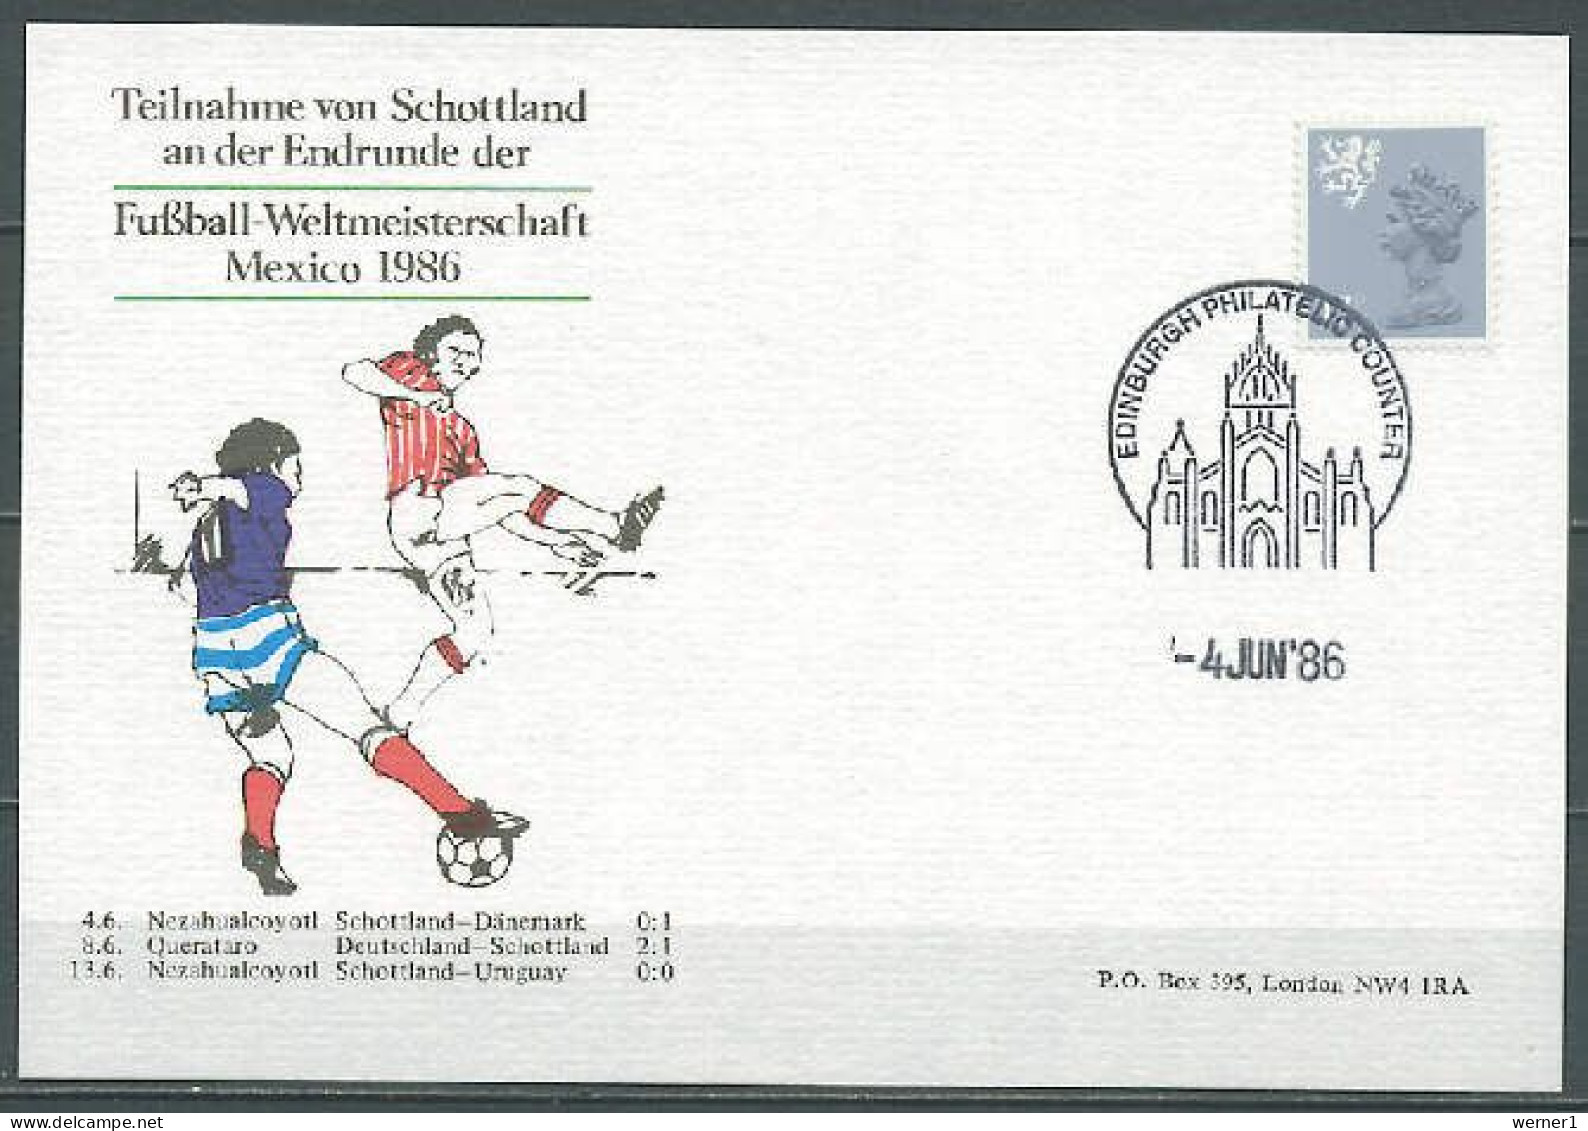 Scotland 1986 Football Soccer World Cup Commemorative Postcard With Results Of The Scottish Team - 1986 – Messico